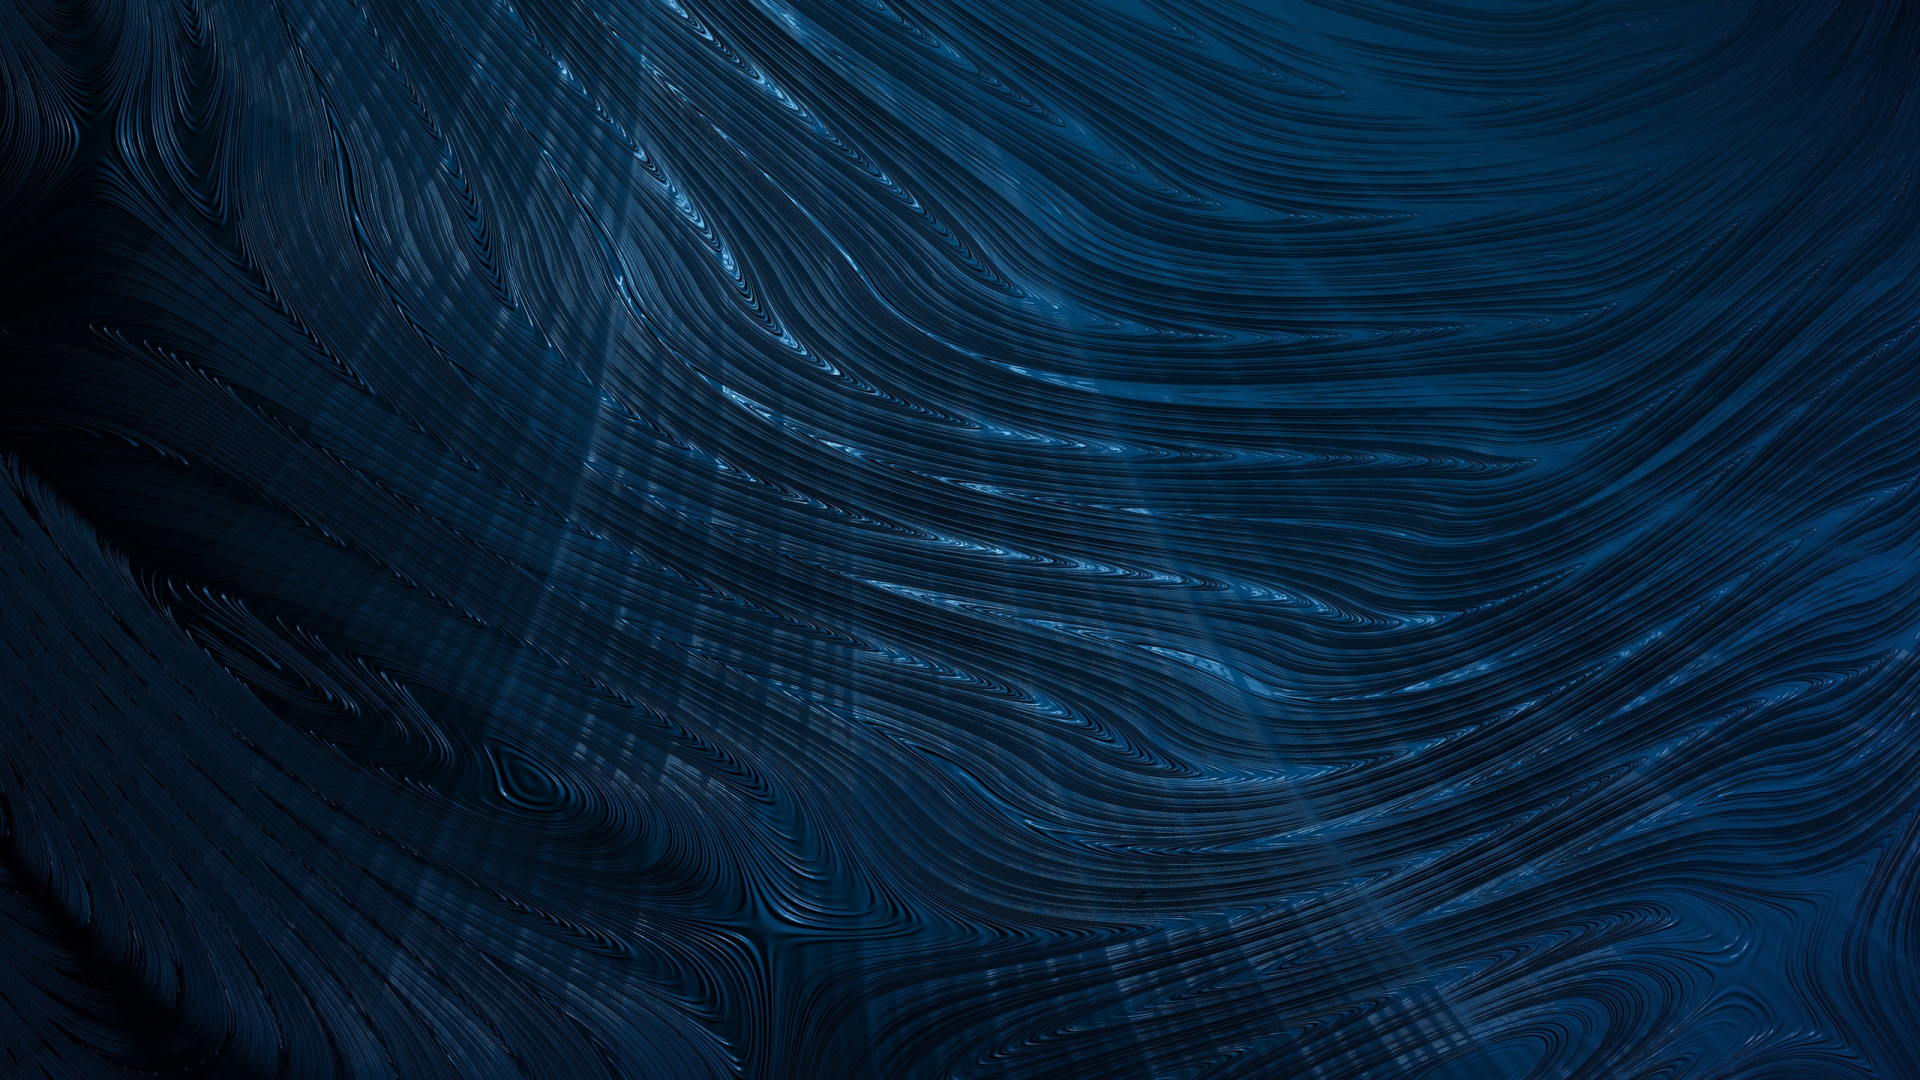 Blue and White Abstract Painting. Wallpaper in 1920x1080 Resolution